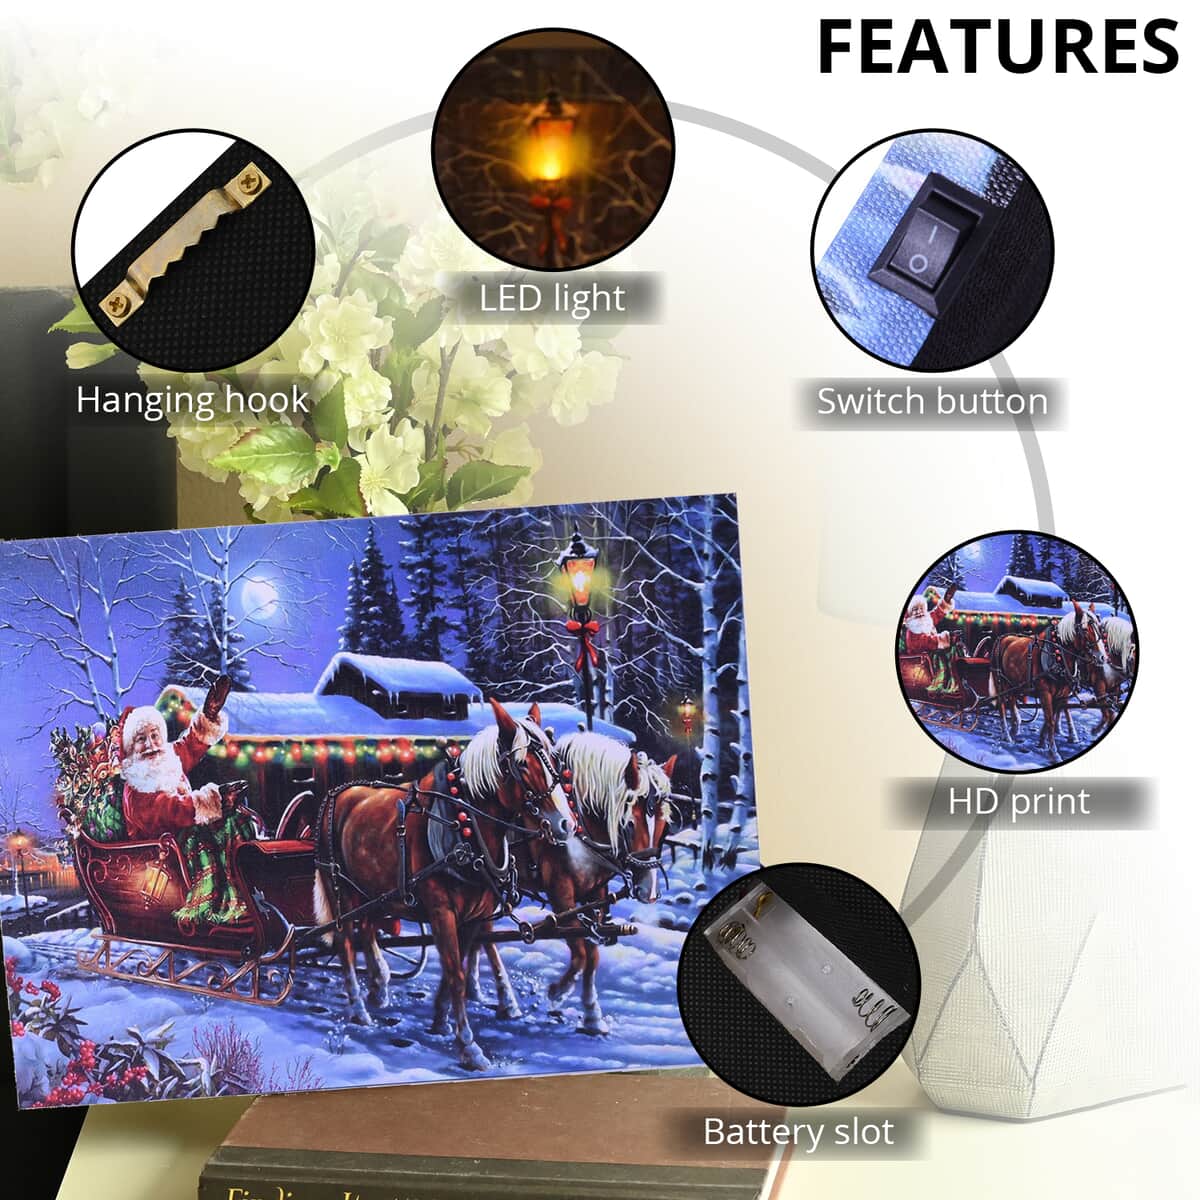 " 3-LED LED Christmas painting-carriage material:FIR+canvas size:30*40 CM(11.81x15.75 inch) weight:0.25kg colors:multicolor battery:2*AA(not include) " image number 2